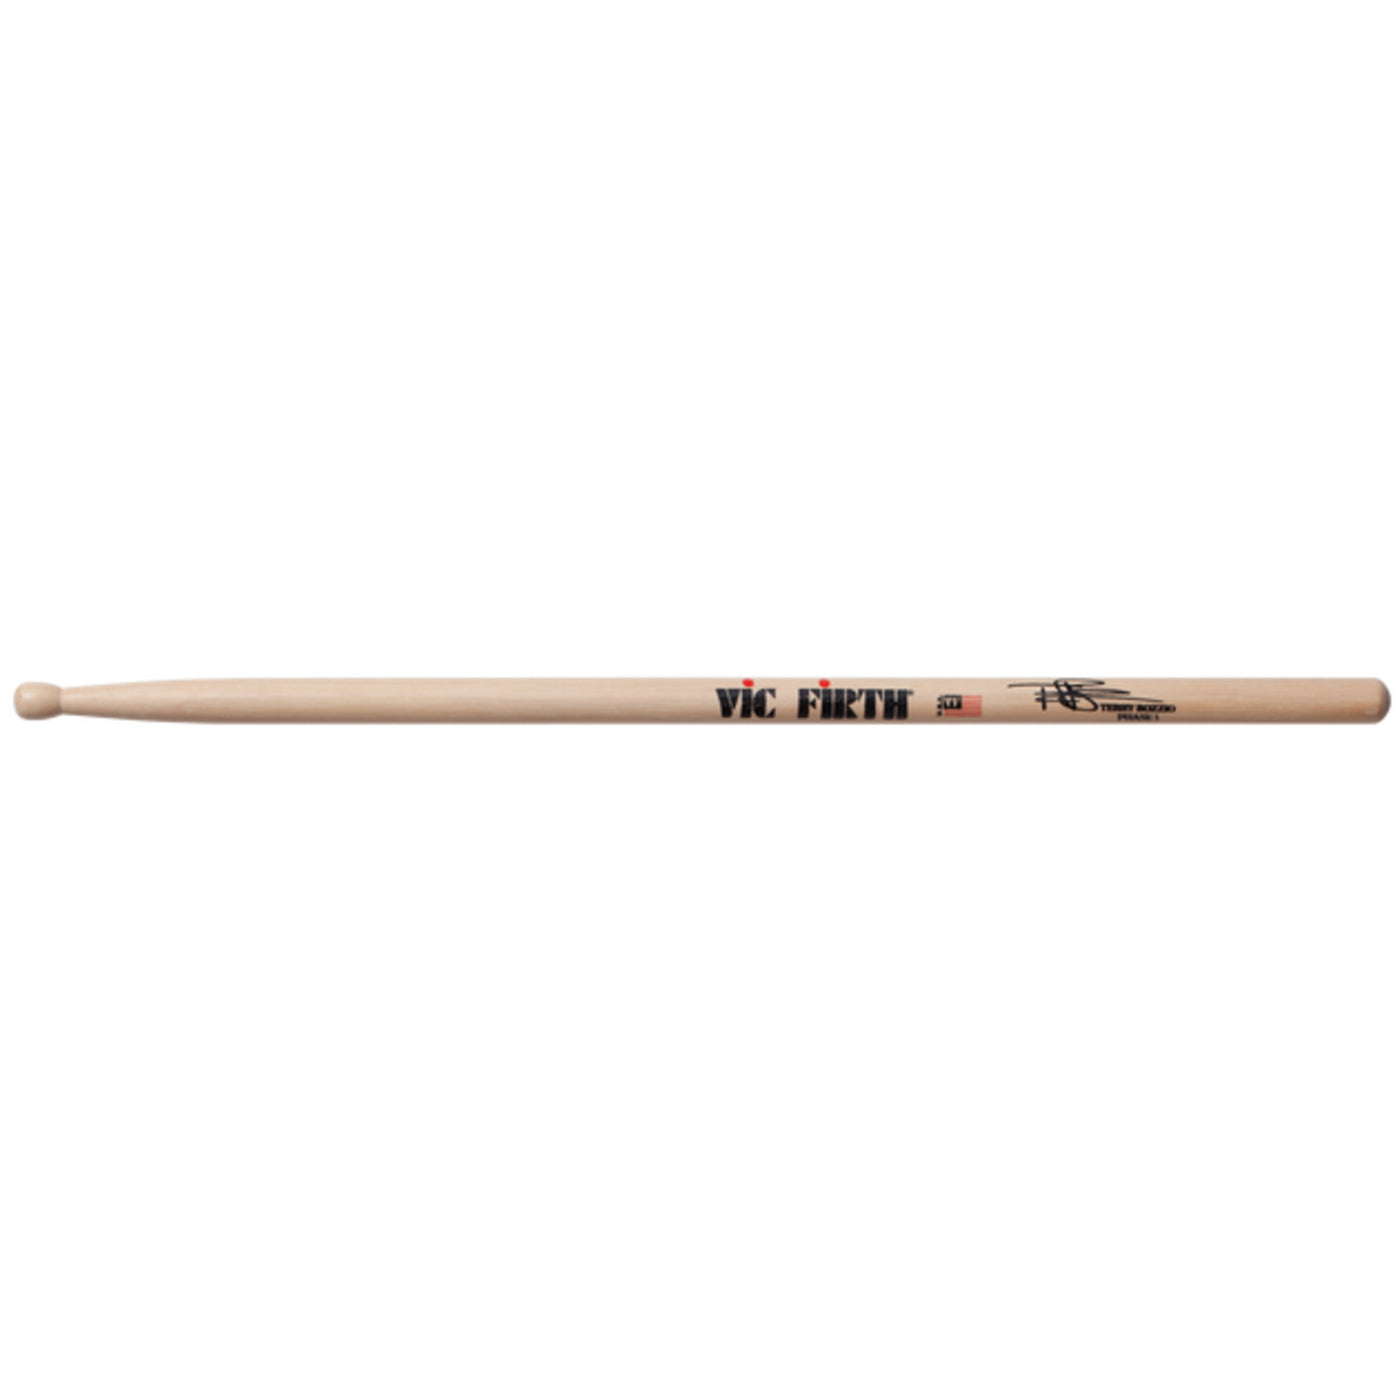 Vic Firth Signature Series - Terry Bozzio, Phase 1 Drumstick (STB1)